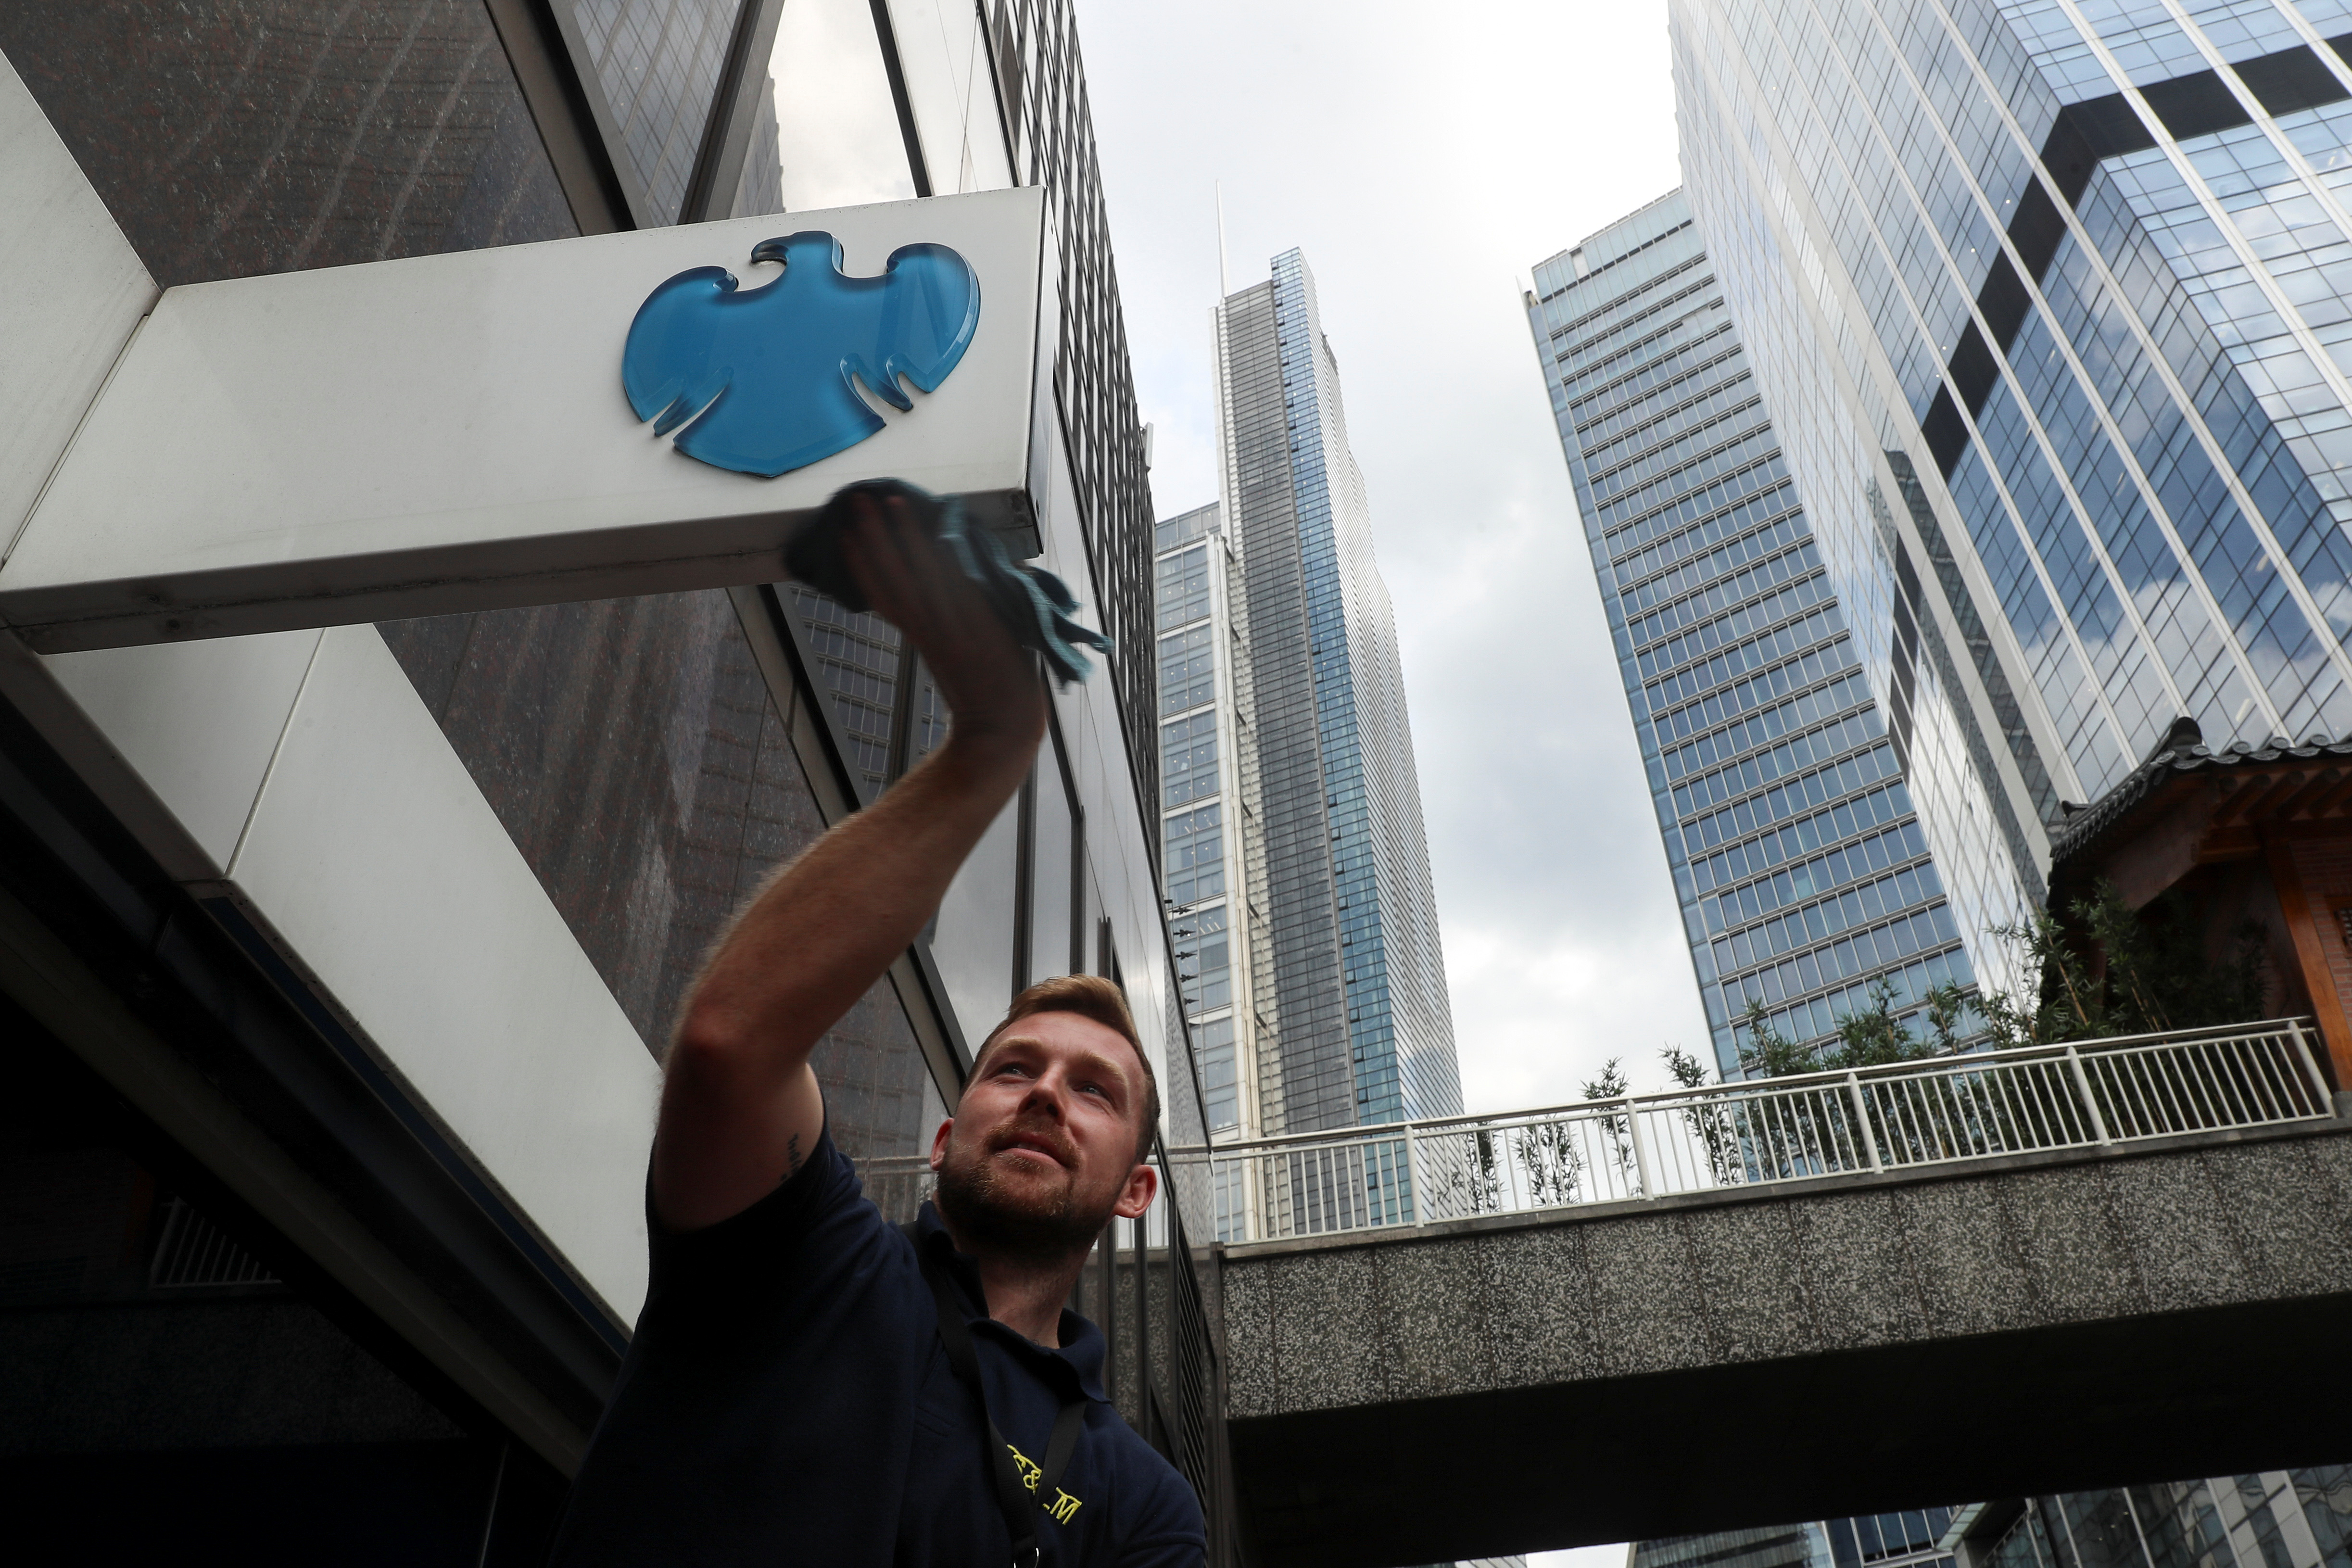 A worker cleans a Barclays logo outside a bank branch in the financial district of London